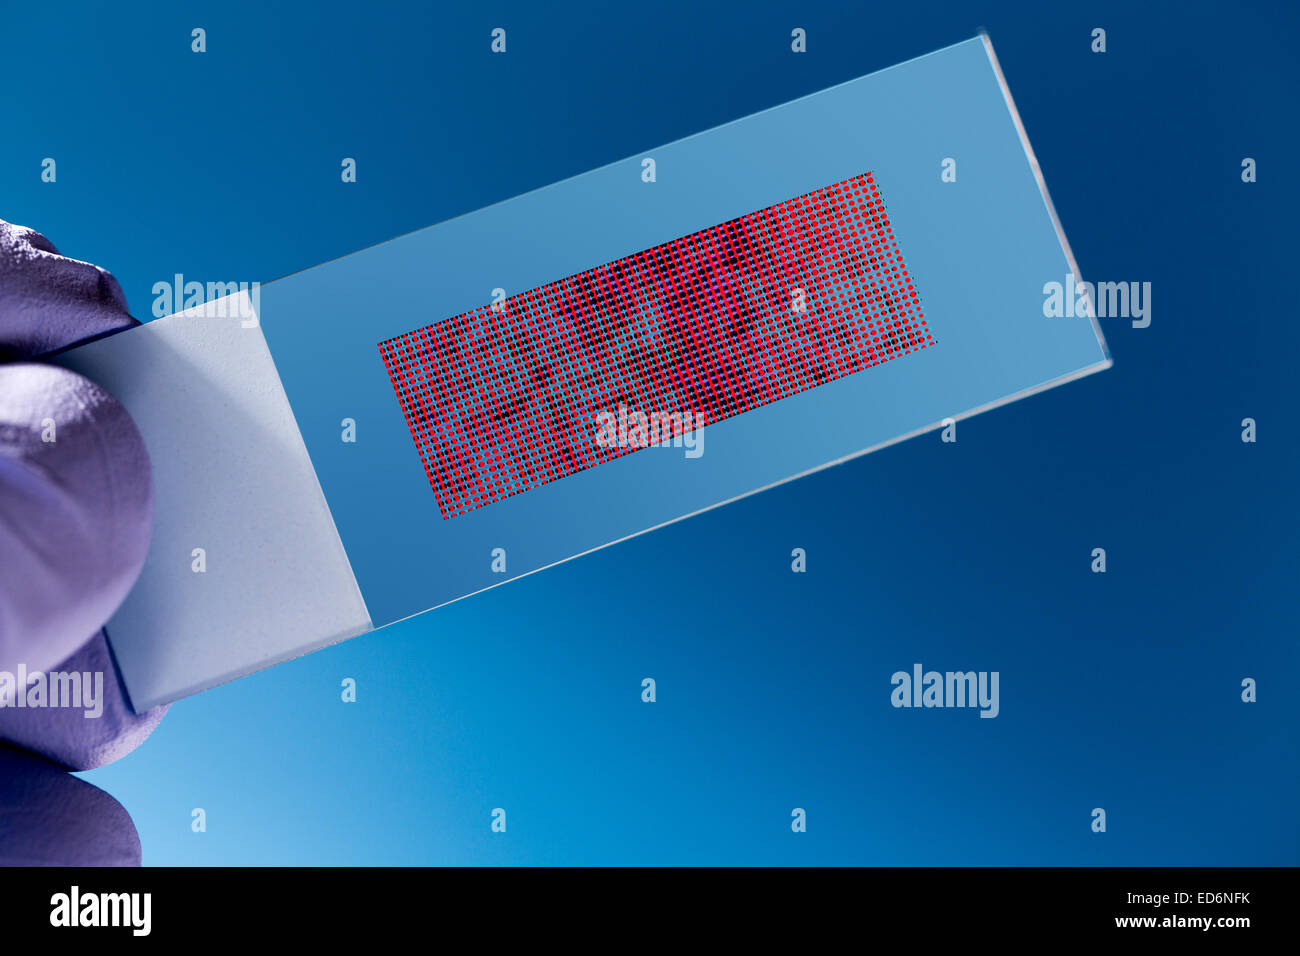 DNA microarray, DNA chip or biochip,  array of nano DNA spots attached to a glass surface to measure  levels of large numbers of Stock Photo